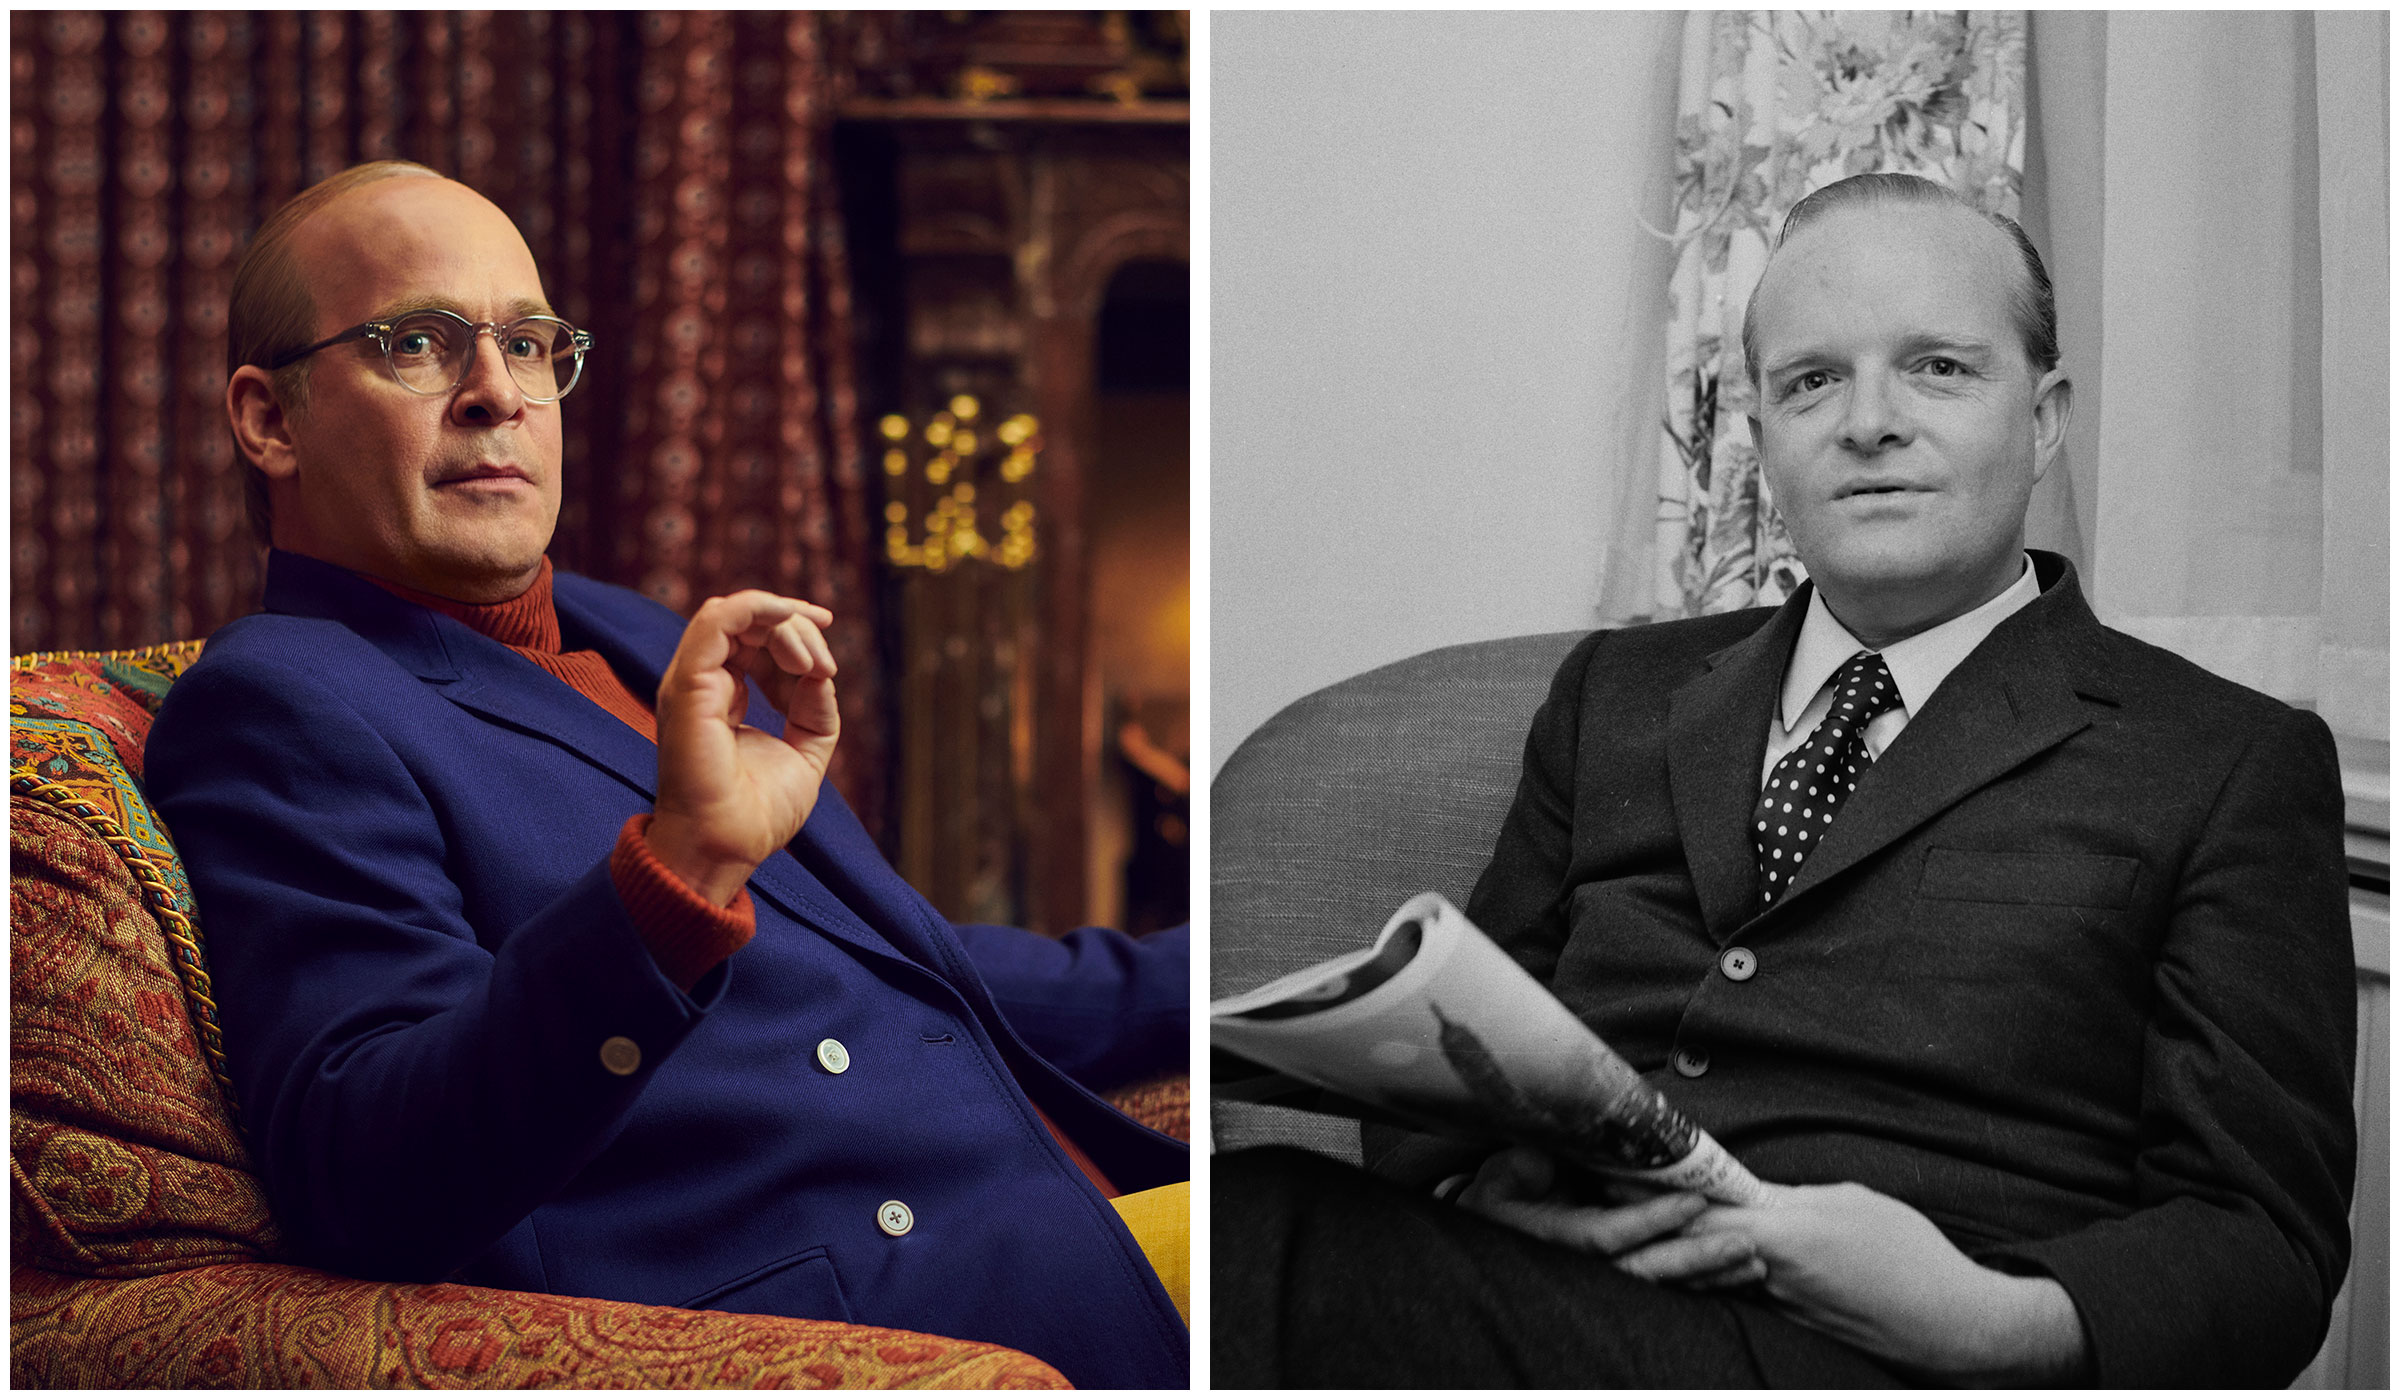 diptych of Tom Hollander as Truman Capote and Truman Capote